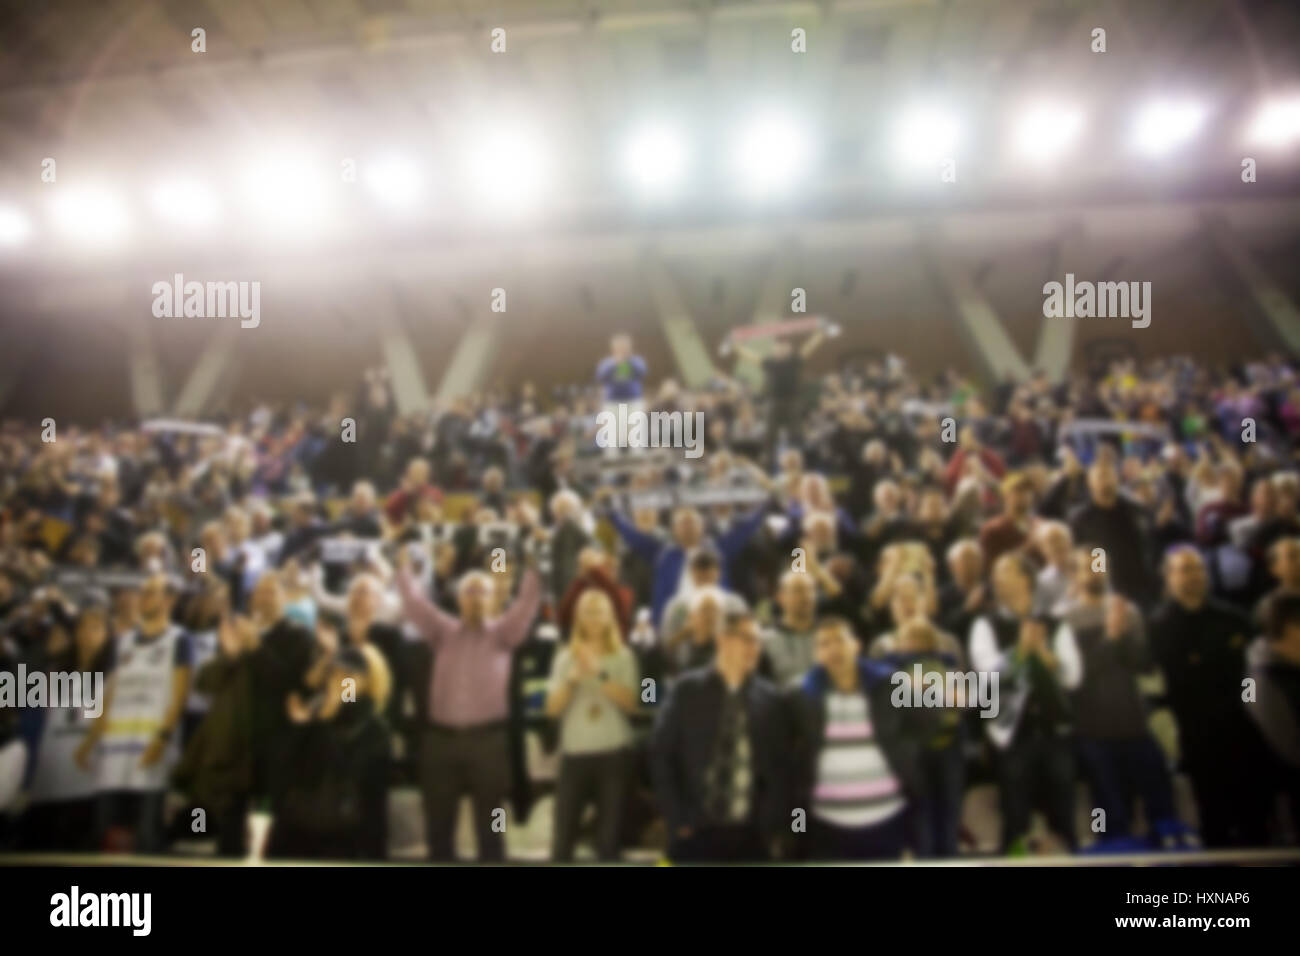 blurred background of crowd of people in a basketball court Stock Photo